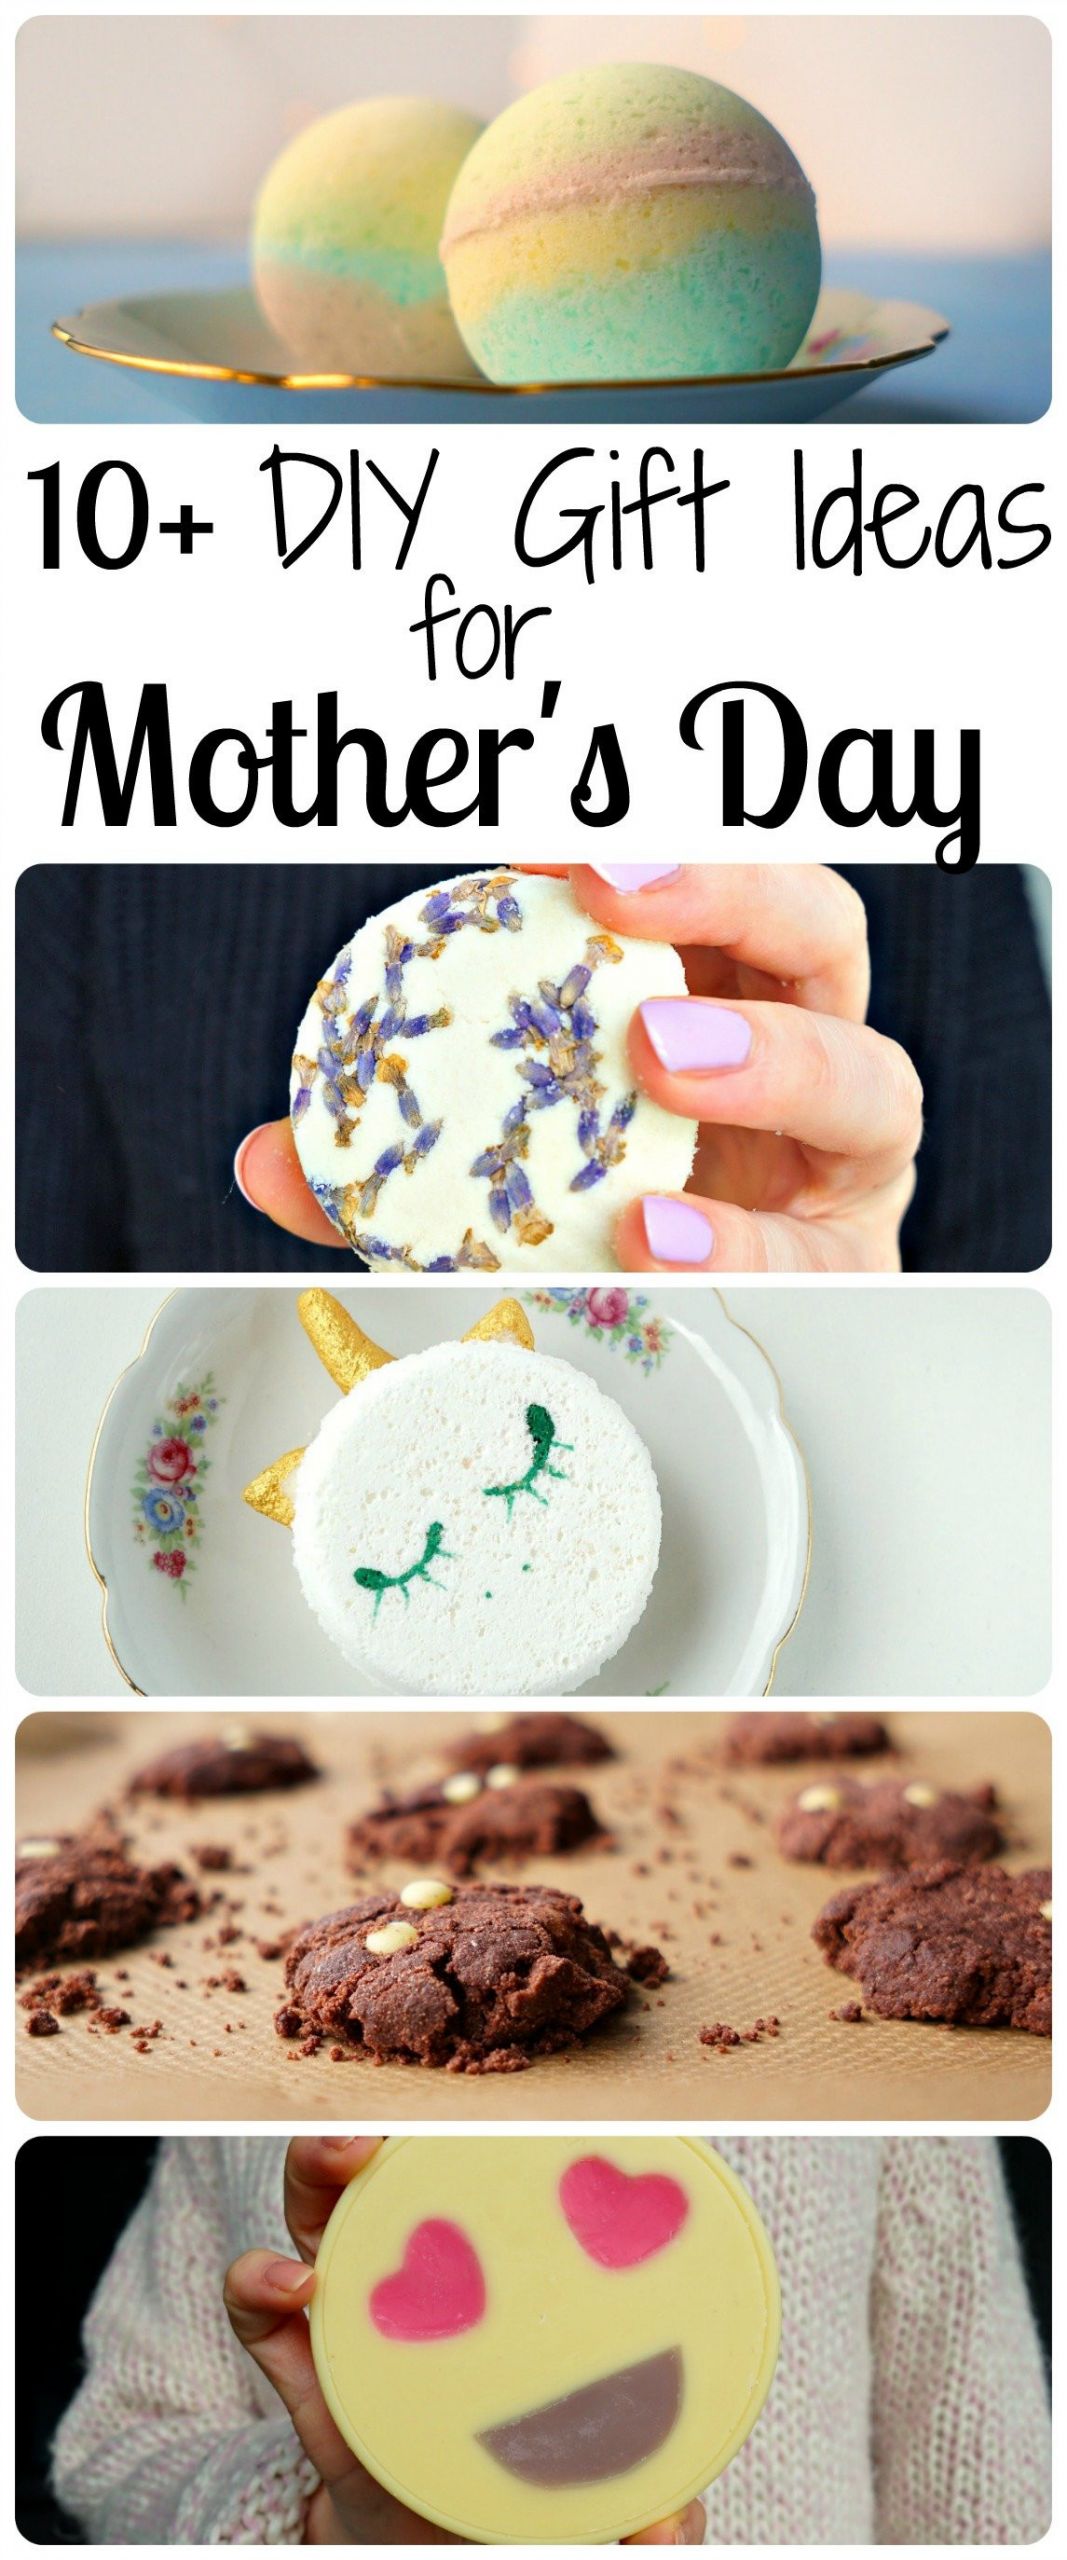 Mother'S Day Photo Gift Ideas
 30 Gift Ideas for Mother s Day to Buy or DIY The Makeup